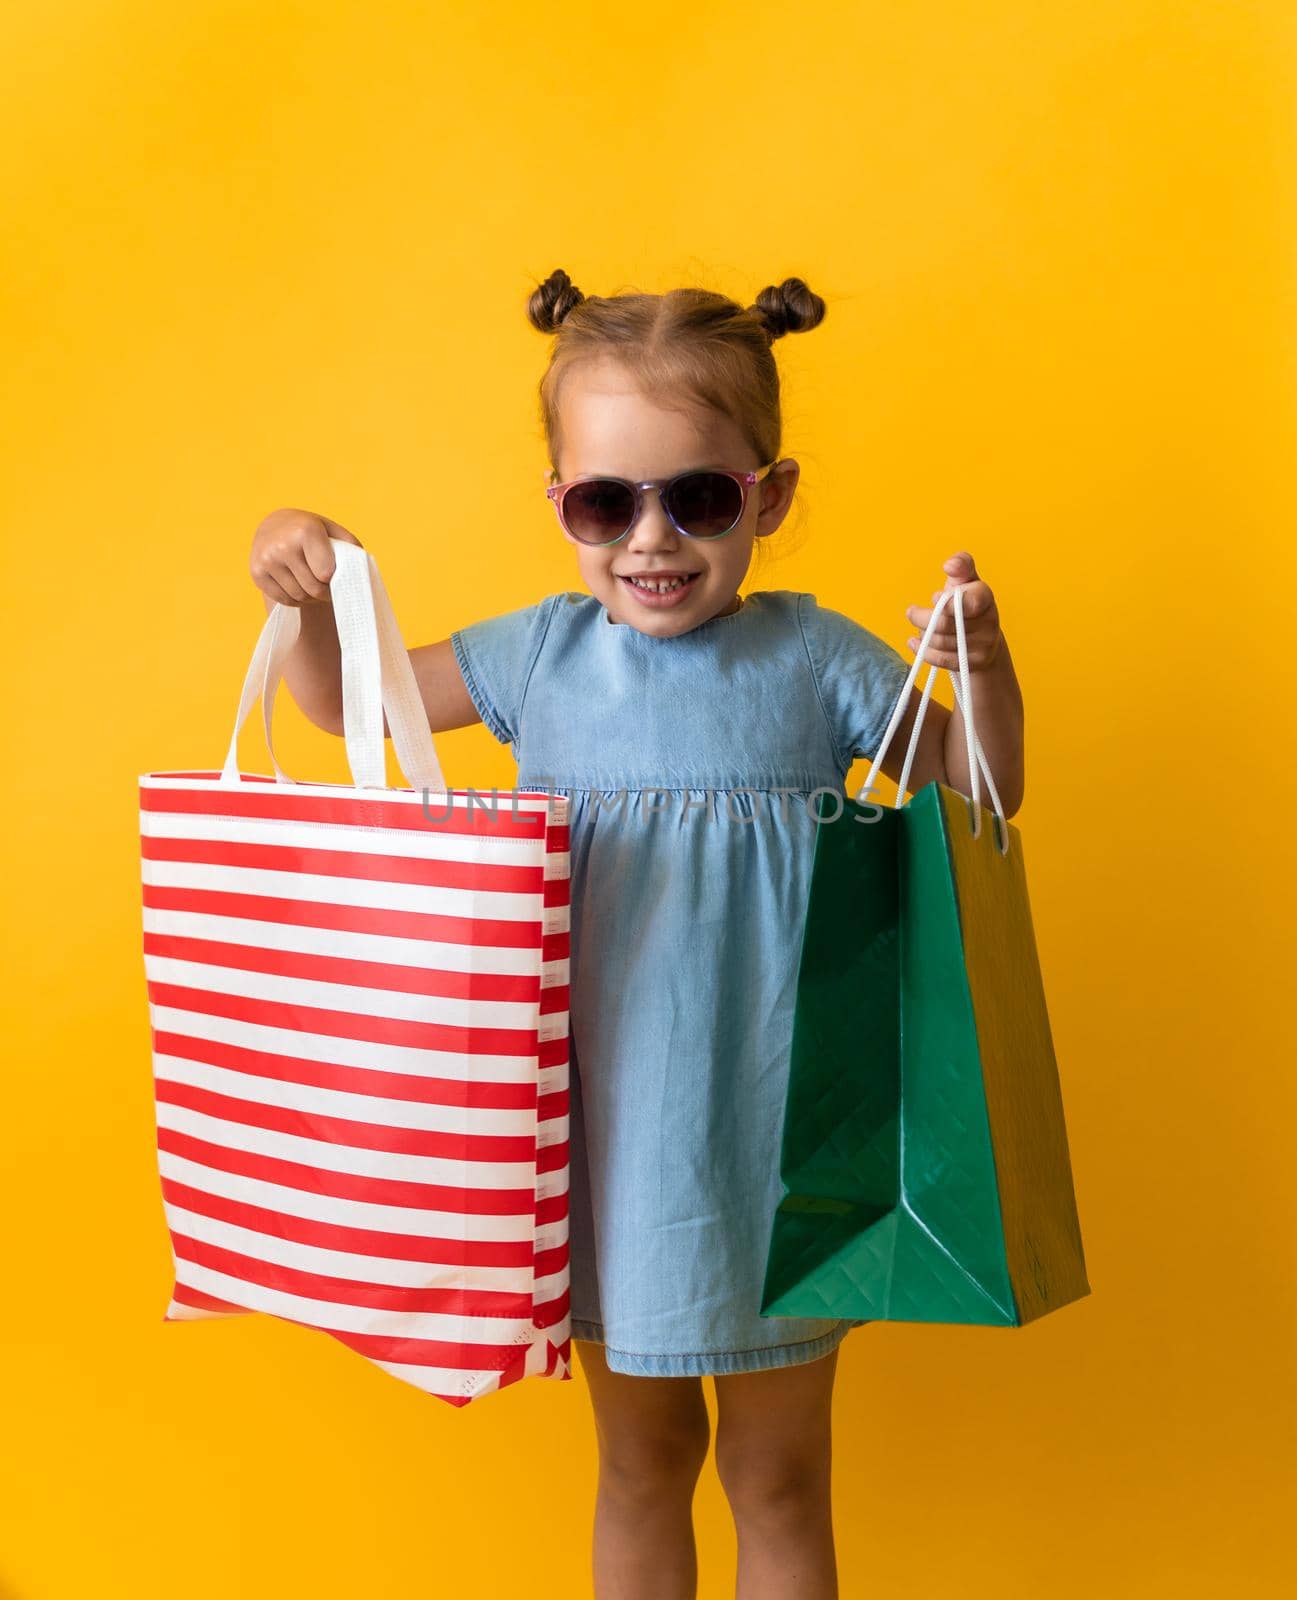 Portrait Beautiful Happy Little Preschool Girl In Sunglasses Smiling Cheerful Holding Cardboard Bags Isolated On Orange Yellow Studio background. Happiness, Consumerism, Sale People shopping Concept.